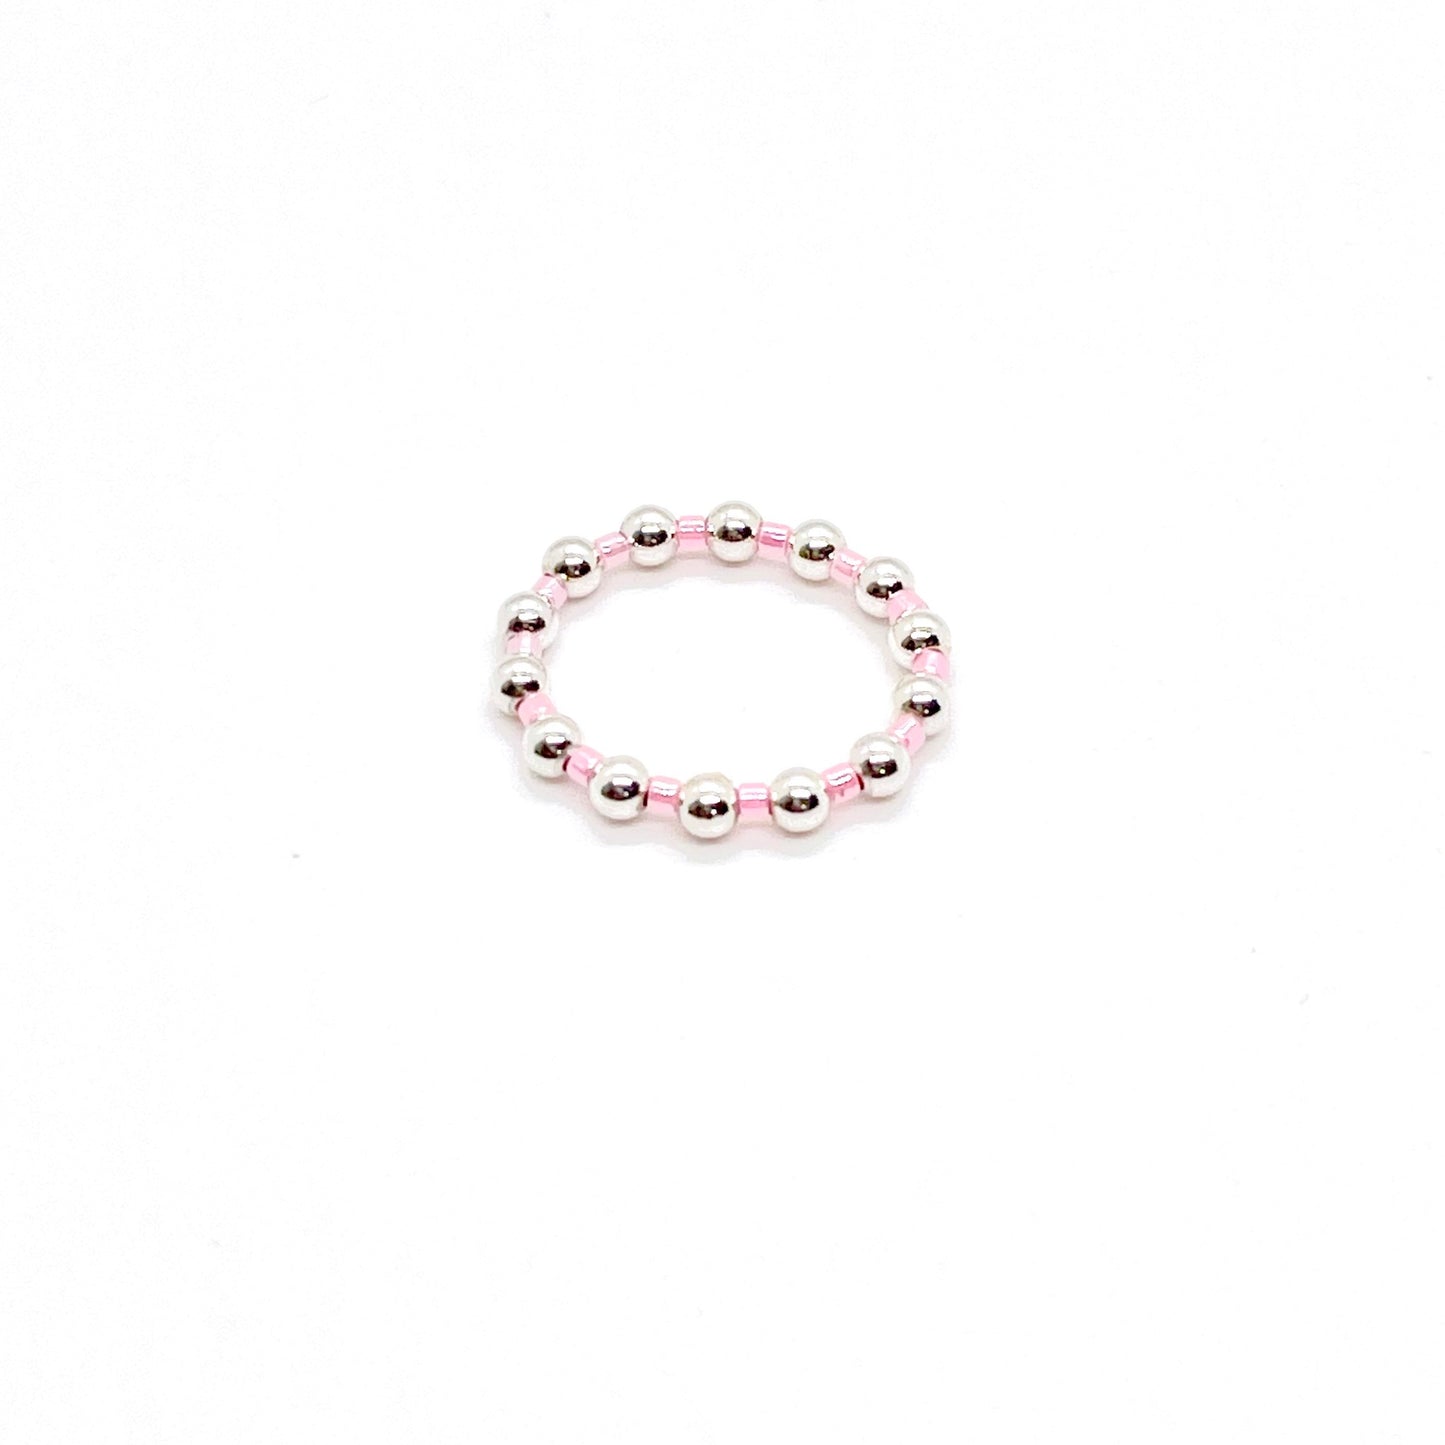 Beaded ring | 3mm sterling silver ball ring with alternating pink seed beads on stretch cord.